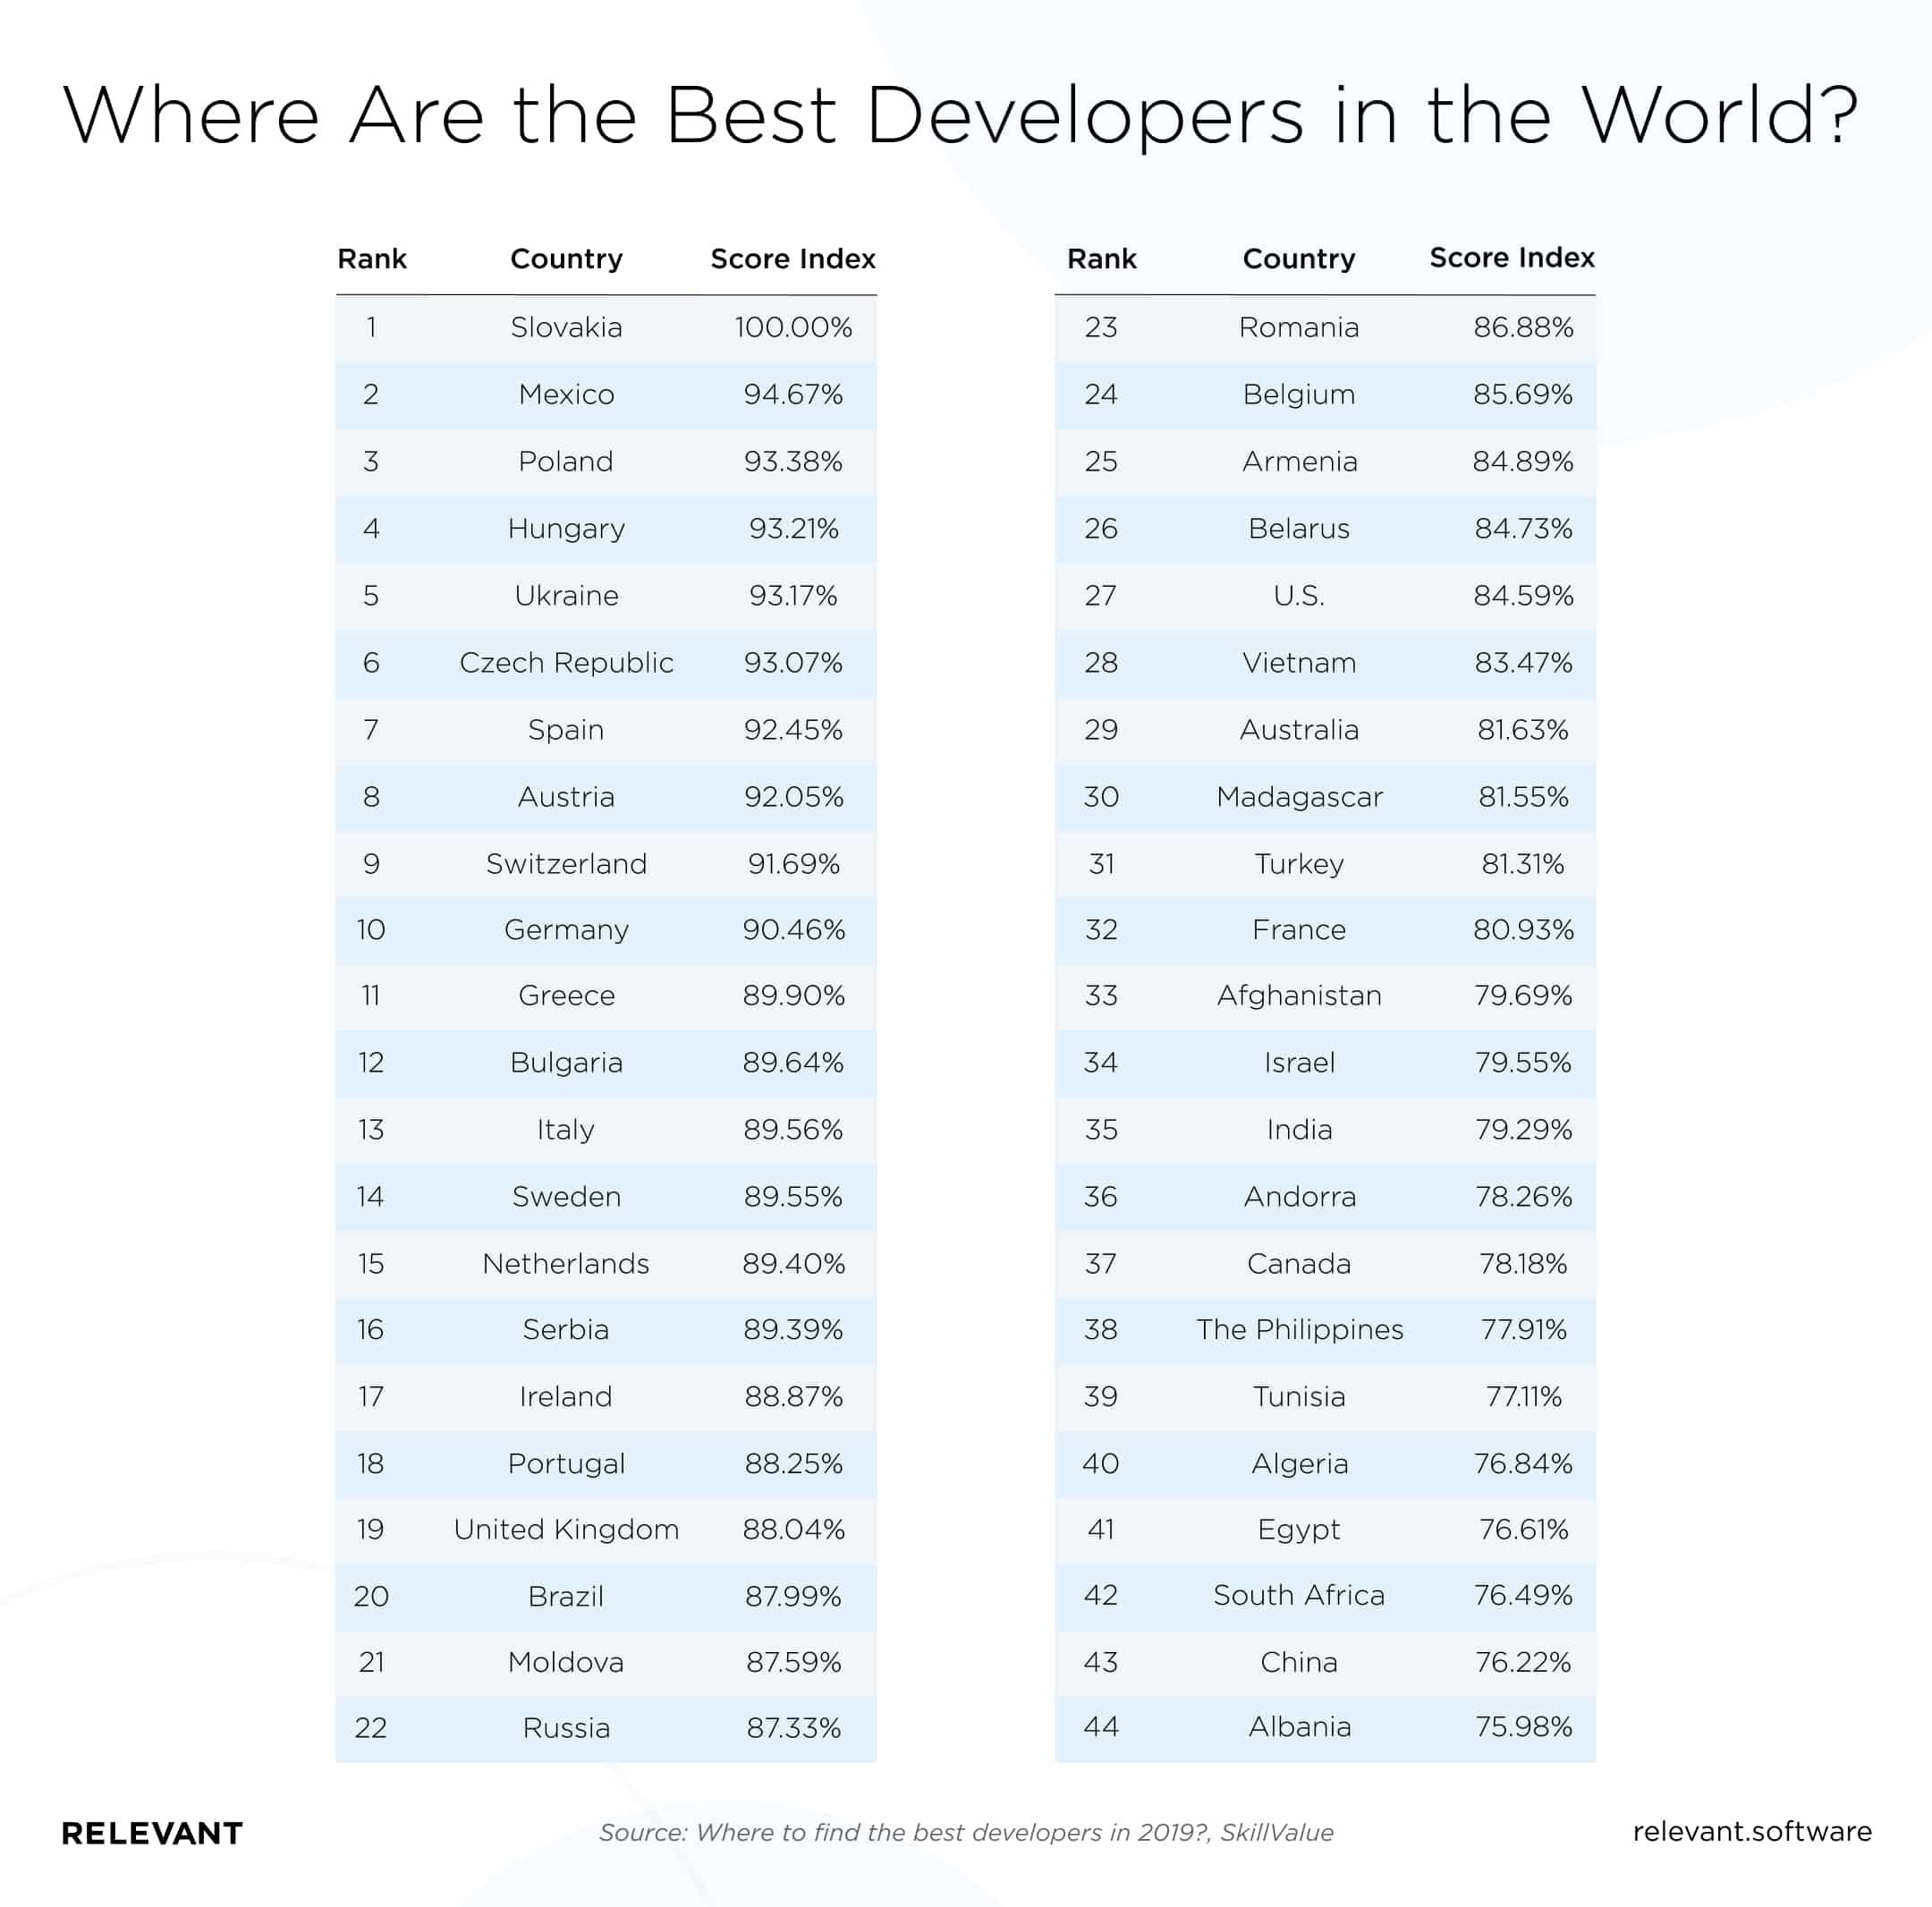 Mexican developers are reported to have second-best programming skills worldwide.